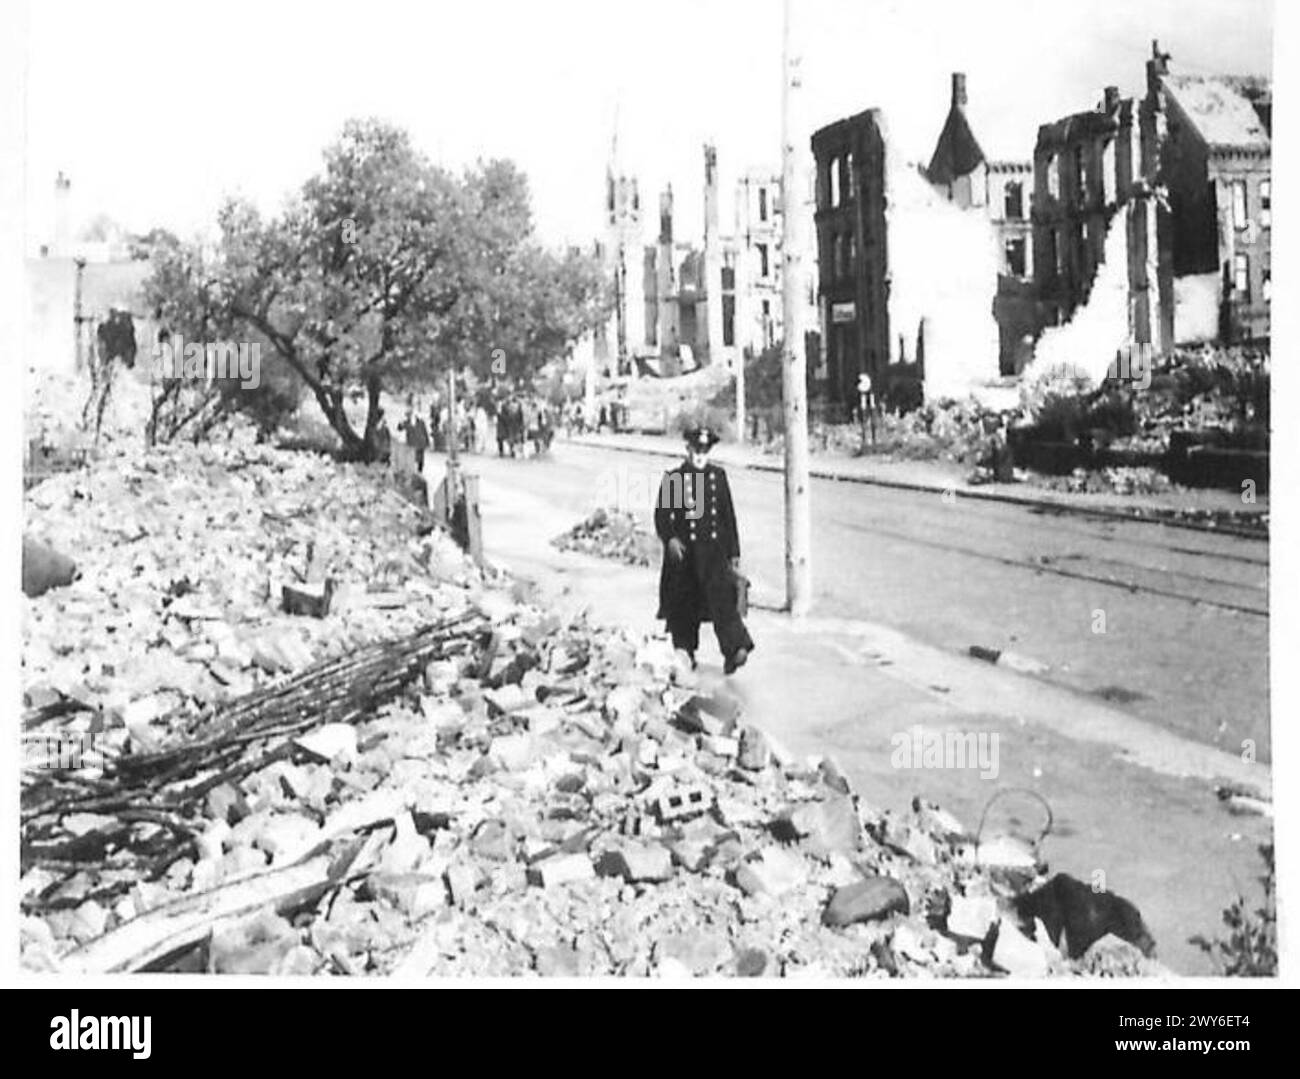 DAMAGE IN KIEL - In the distance a church steeple still standsamidst bombed ruins in Kiel. , British Army, 21st Army Group Stock Photo